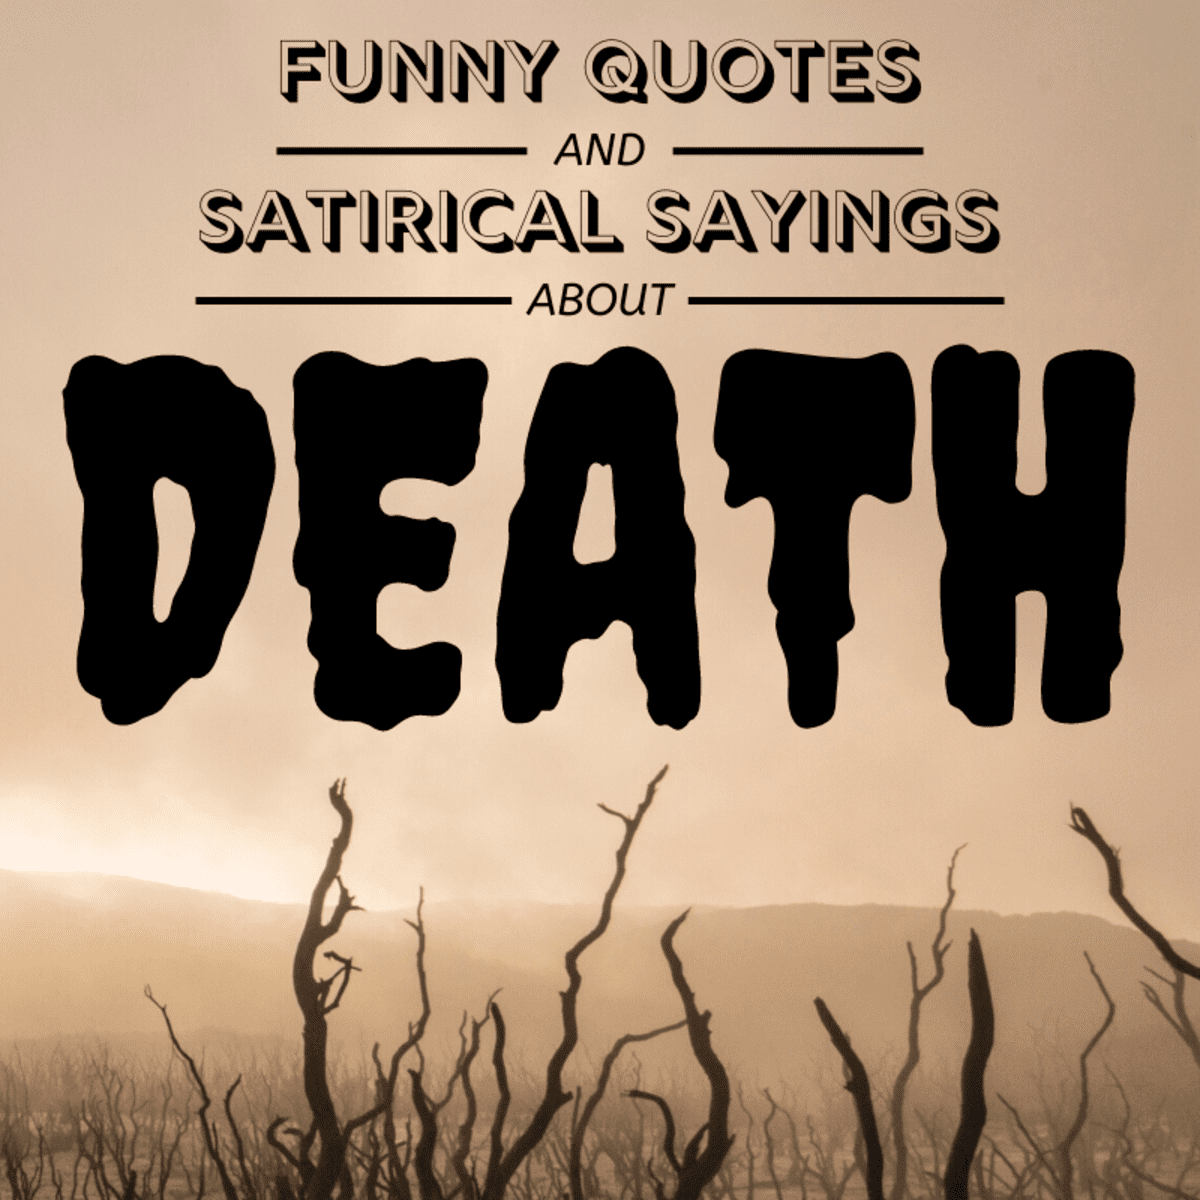 Witty and clever sayings